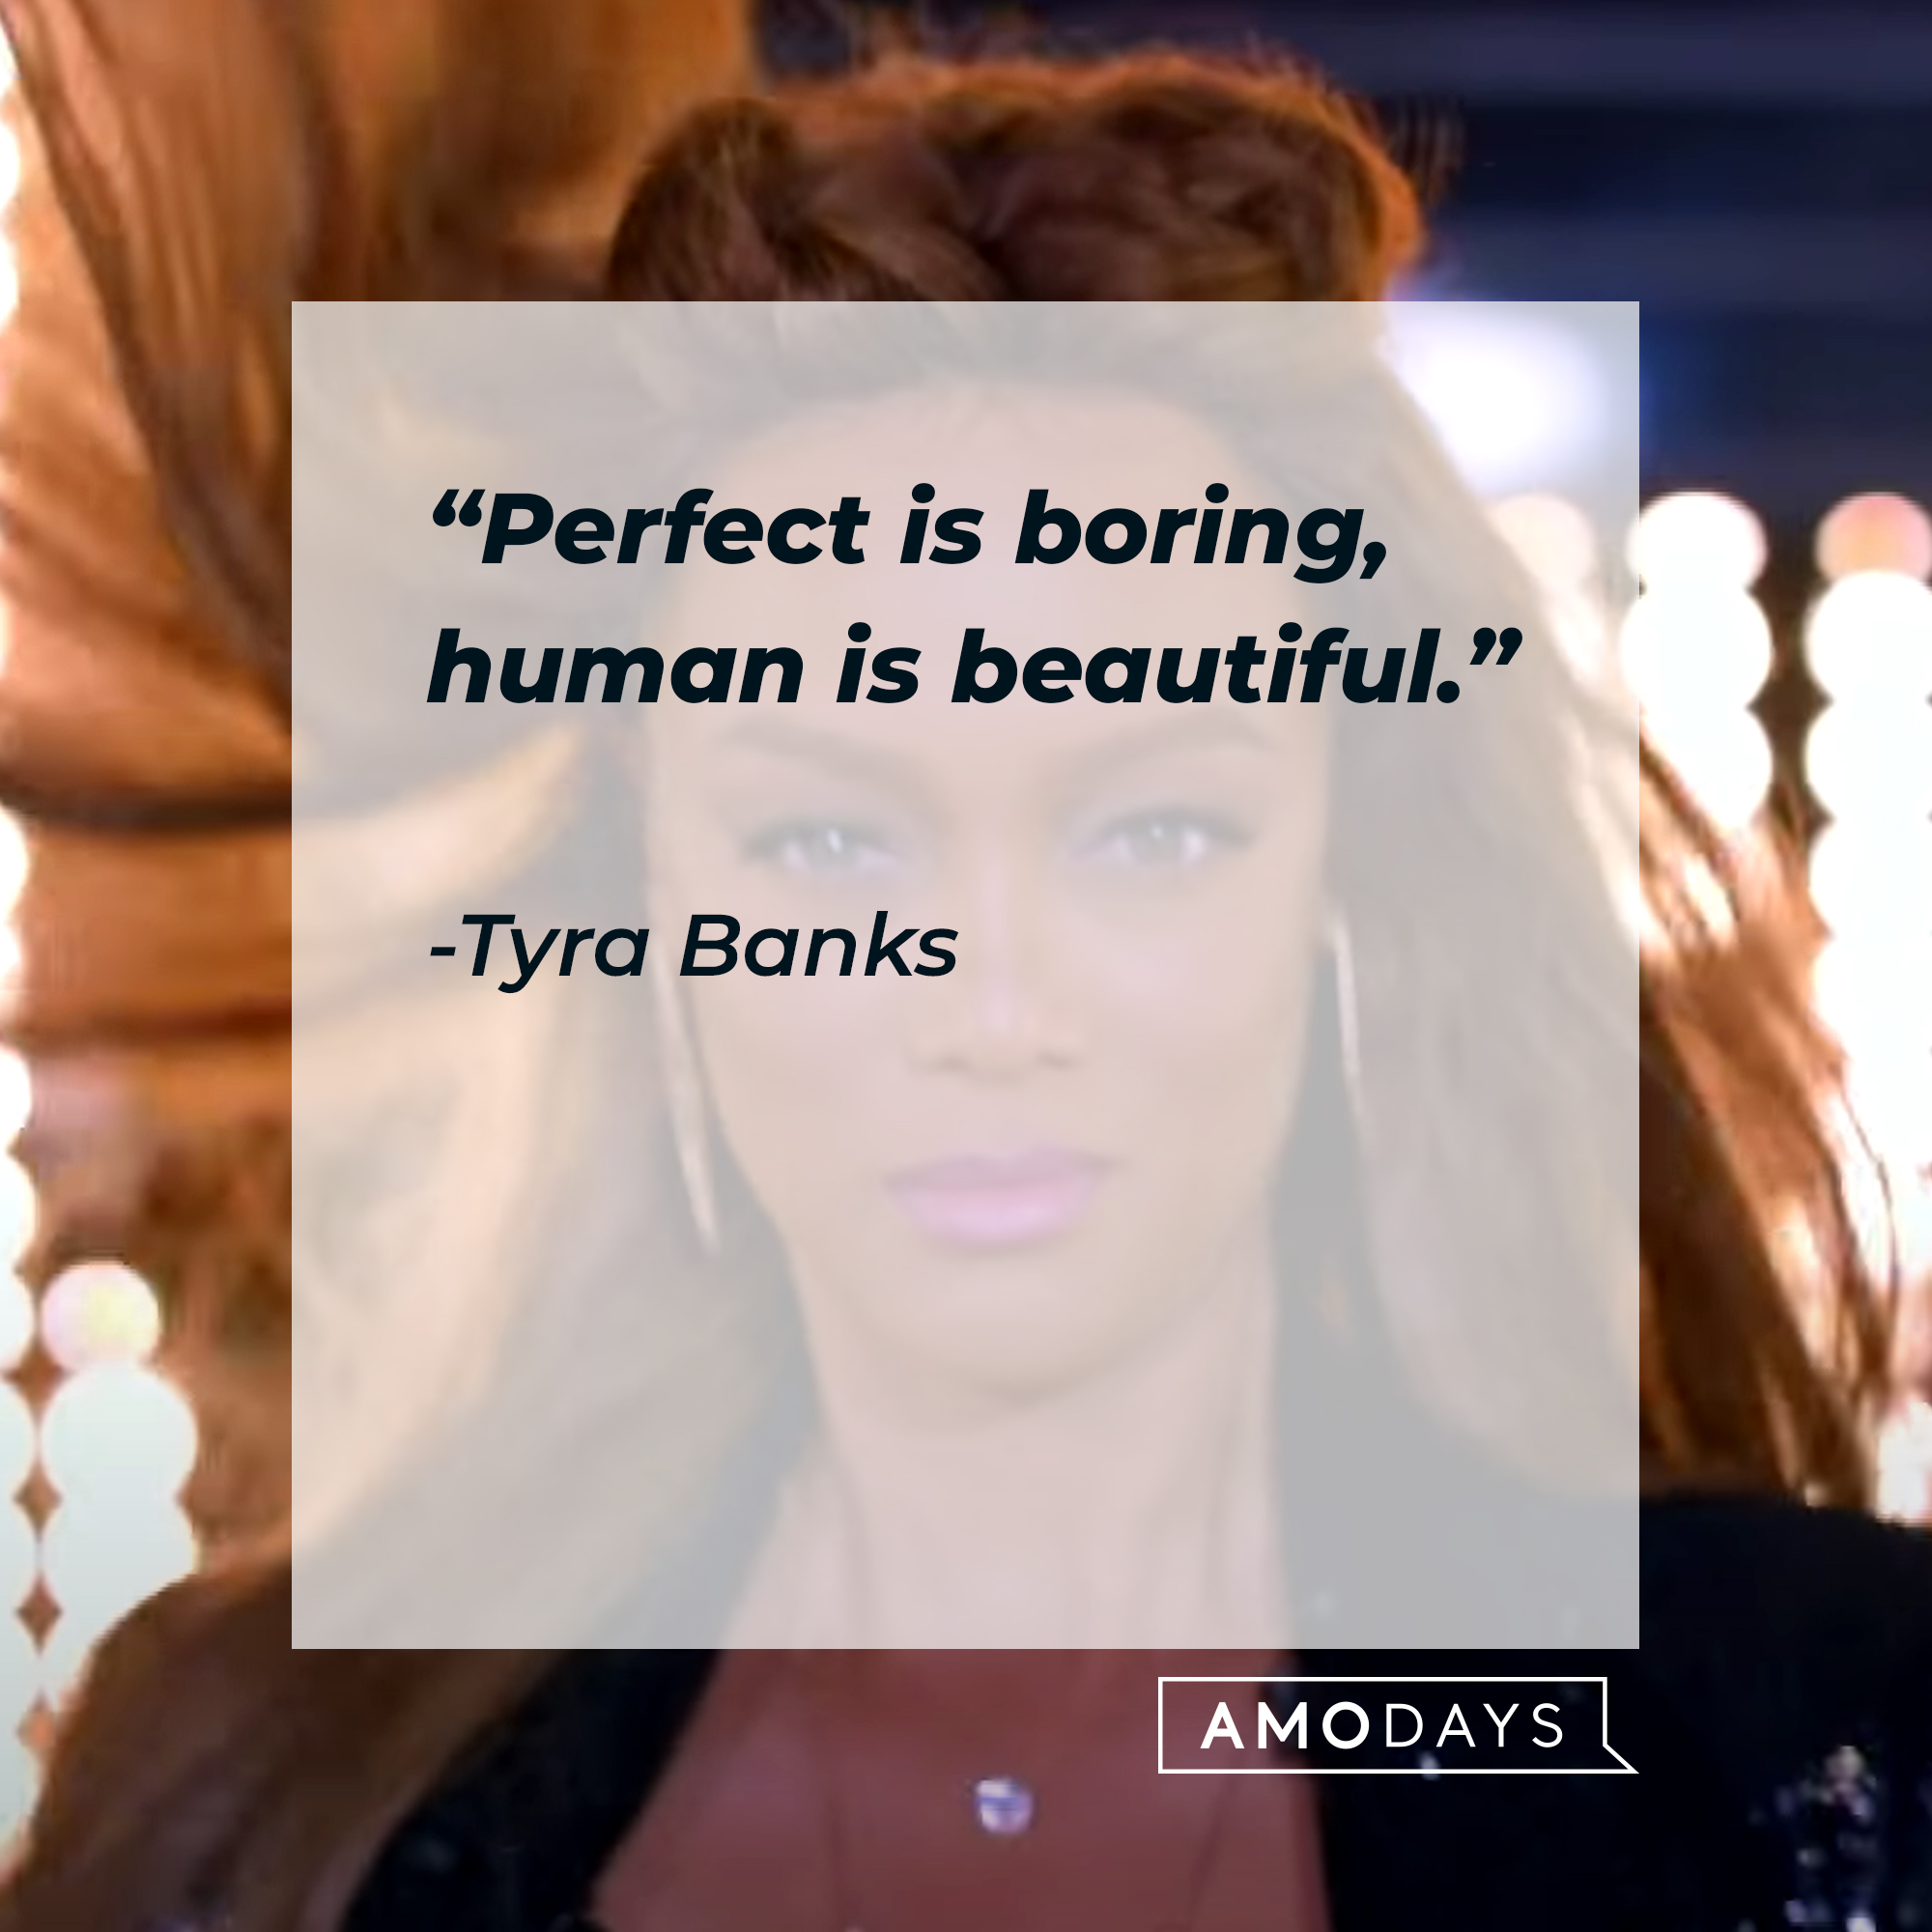 Tyra Banks' quote: "Perfect is boring, human is beautiful." | Source: Getty Images